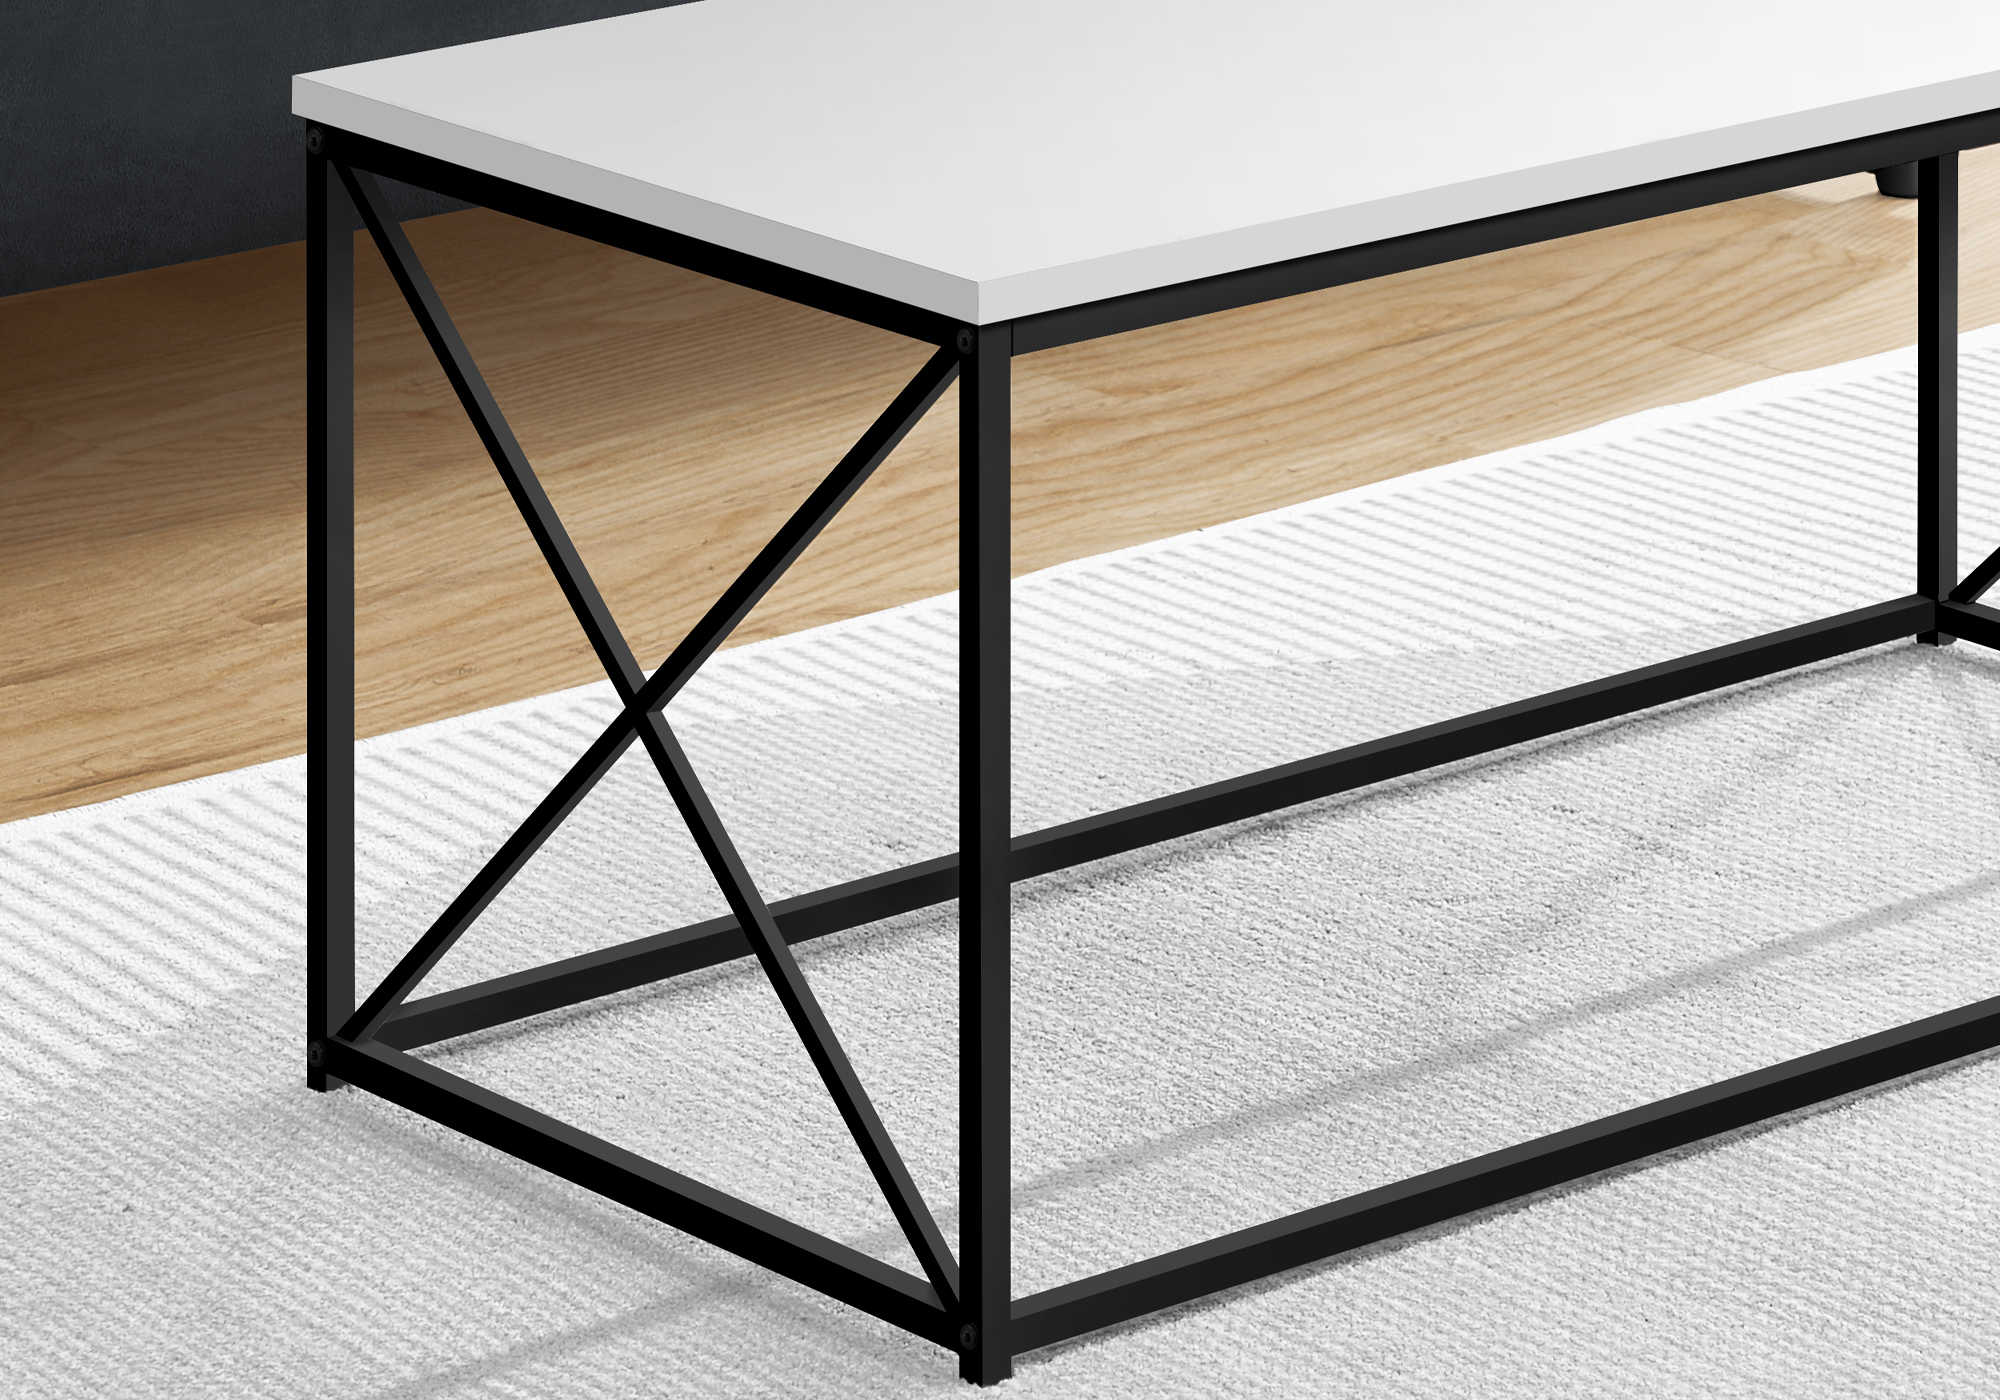 I 3780 - COFFEE TABLE - 40"L / WHITE / BLACK METAL BY MONARCH SPECIALTIES INC